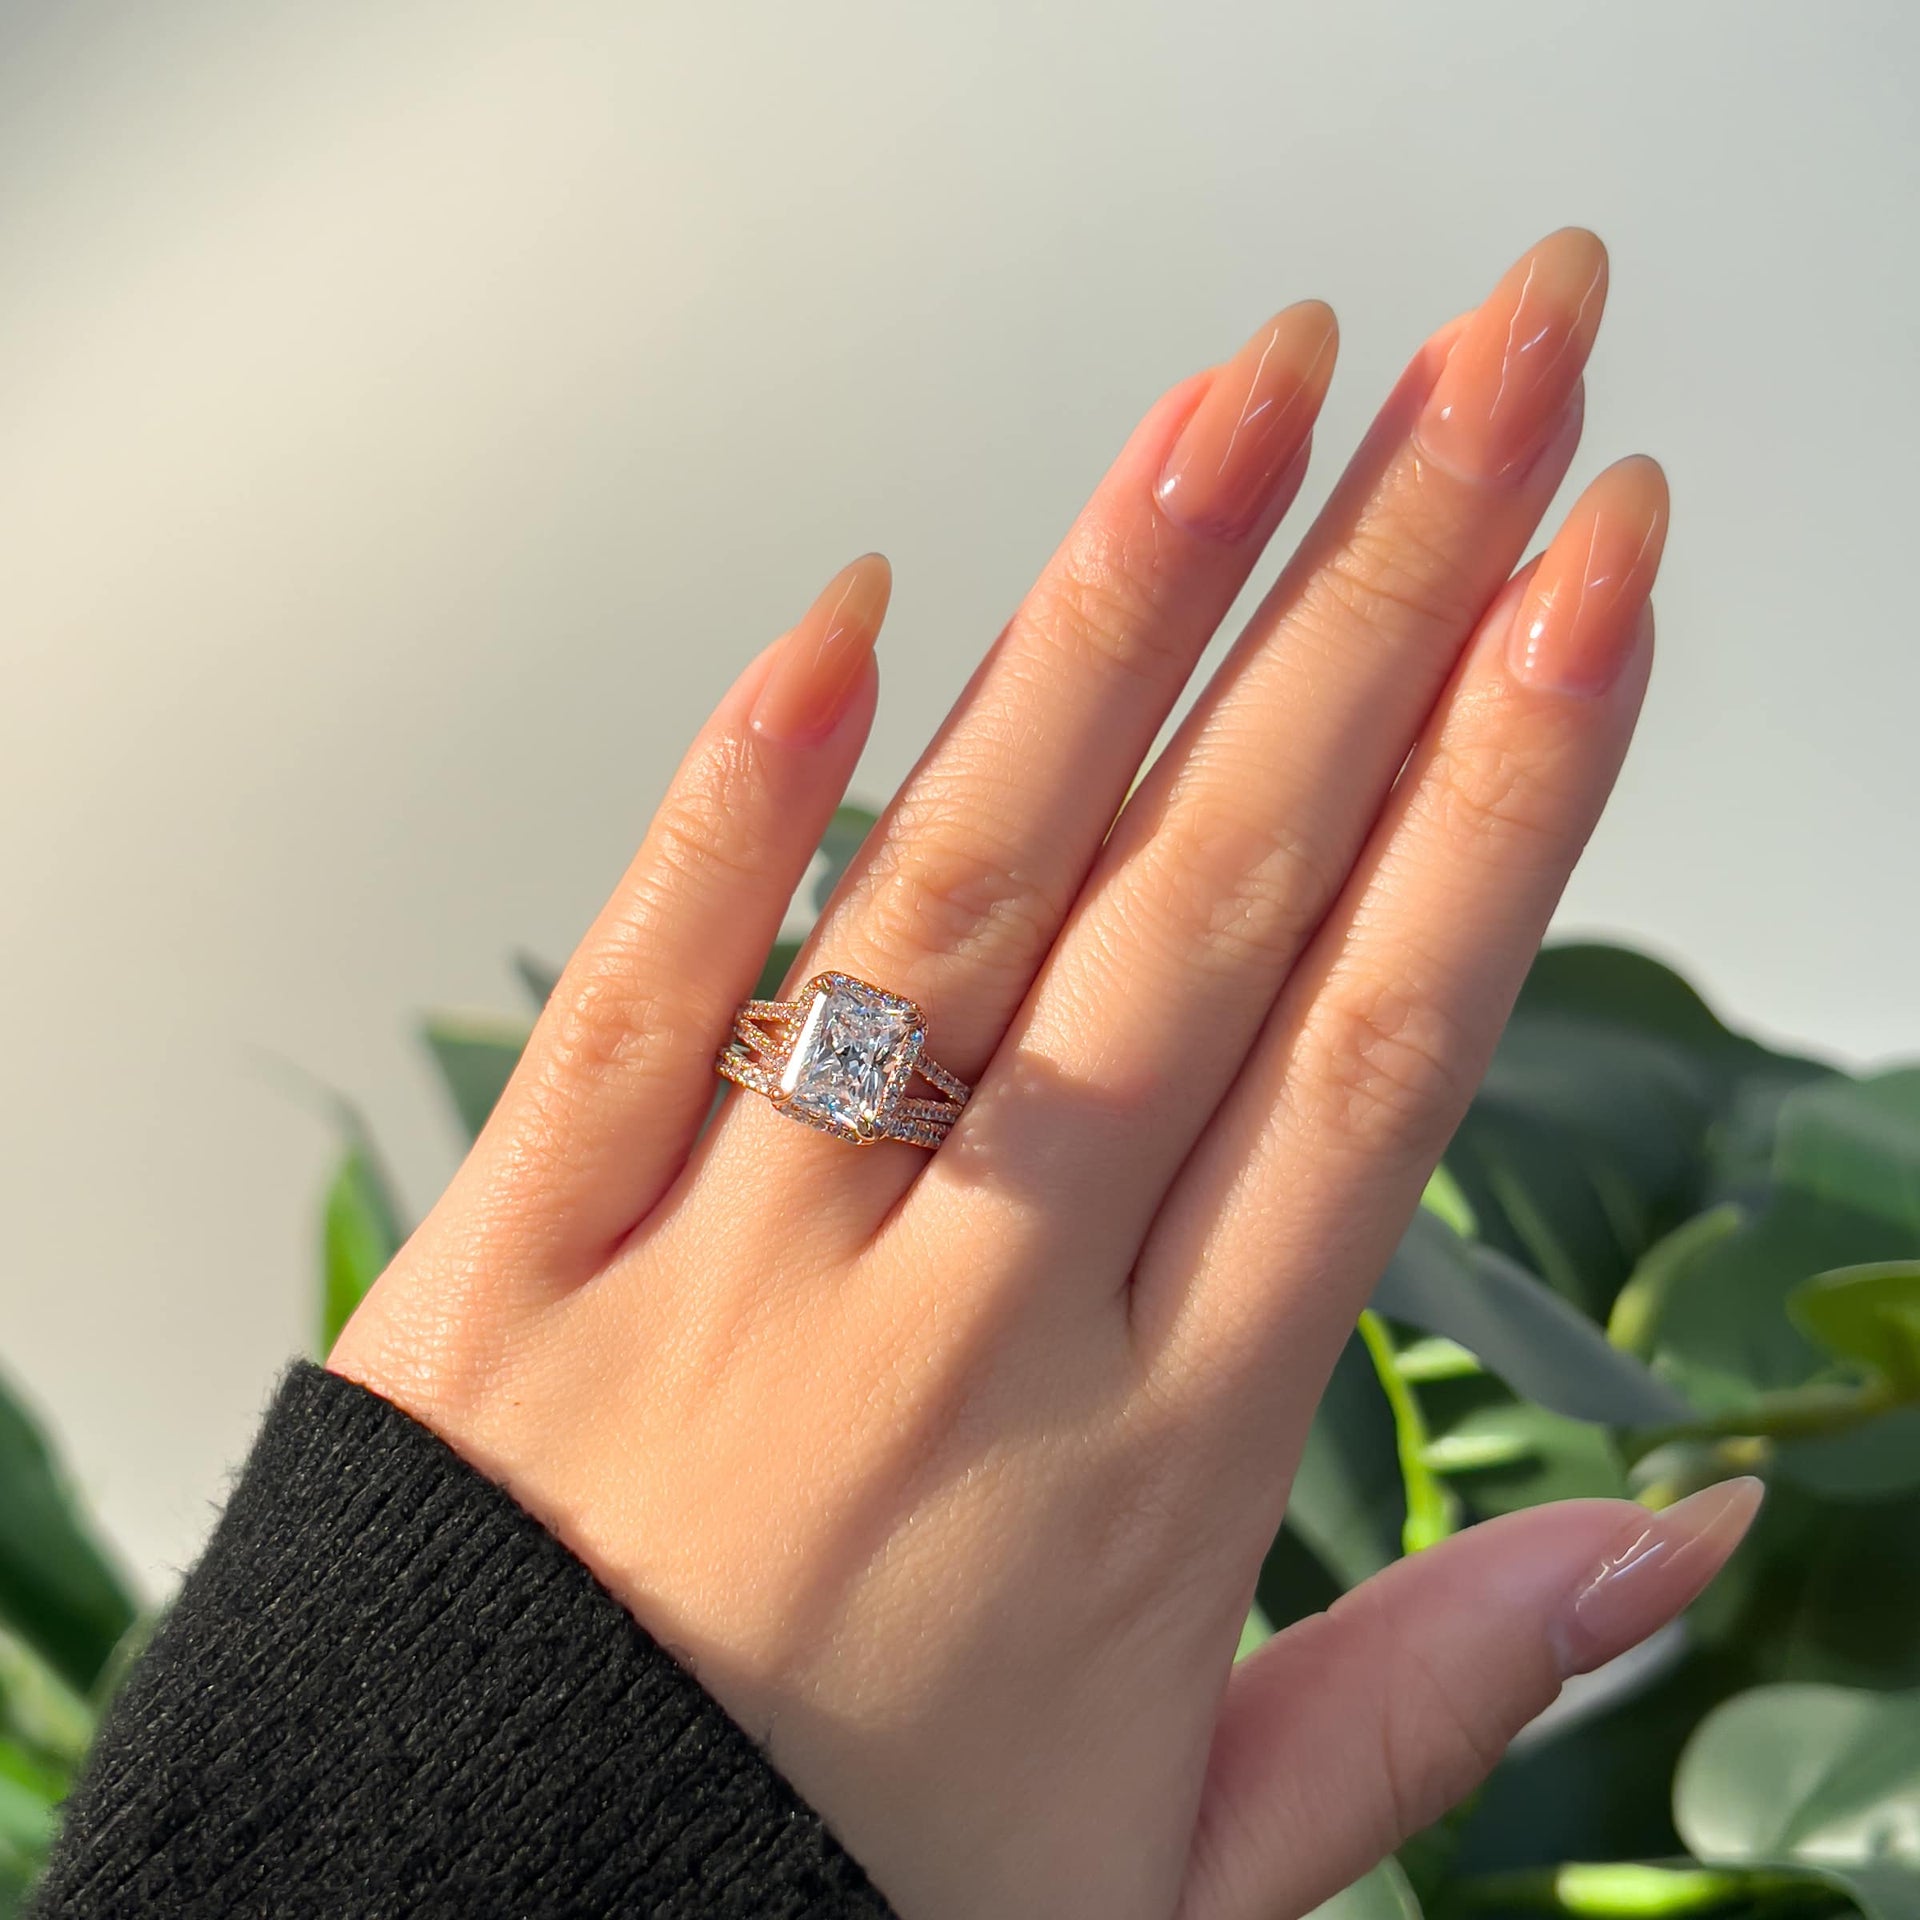 rose gold 3.5 radiant cut engagement ring with halo and split shank detailing, along with matching curved half eternity band on female hand